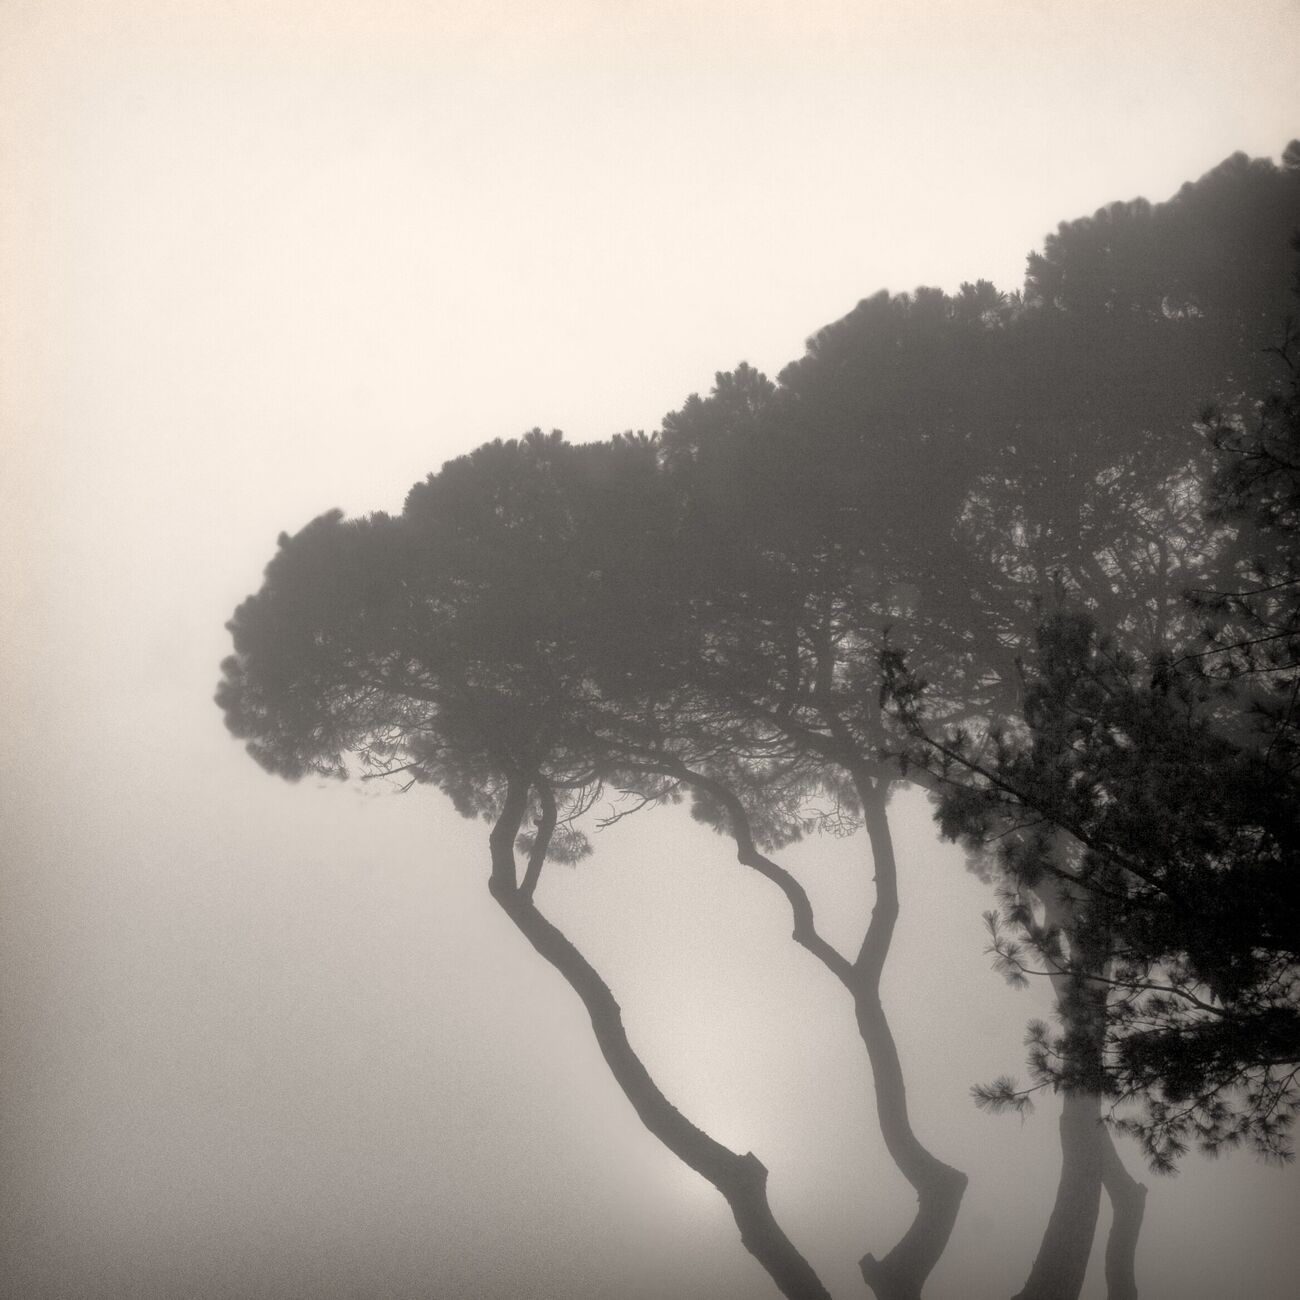 Pines In Fog, Monstequieu, Martillac, France. March 2005. Ref-598 - Denis Olivier Photography